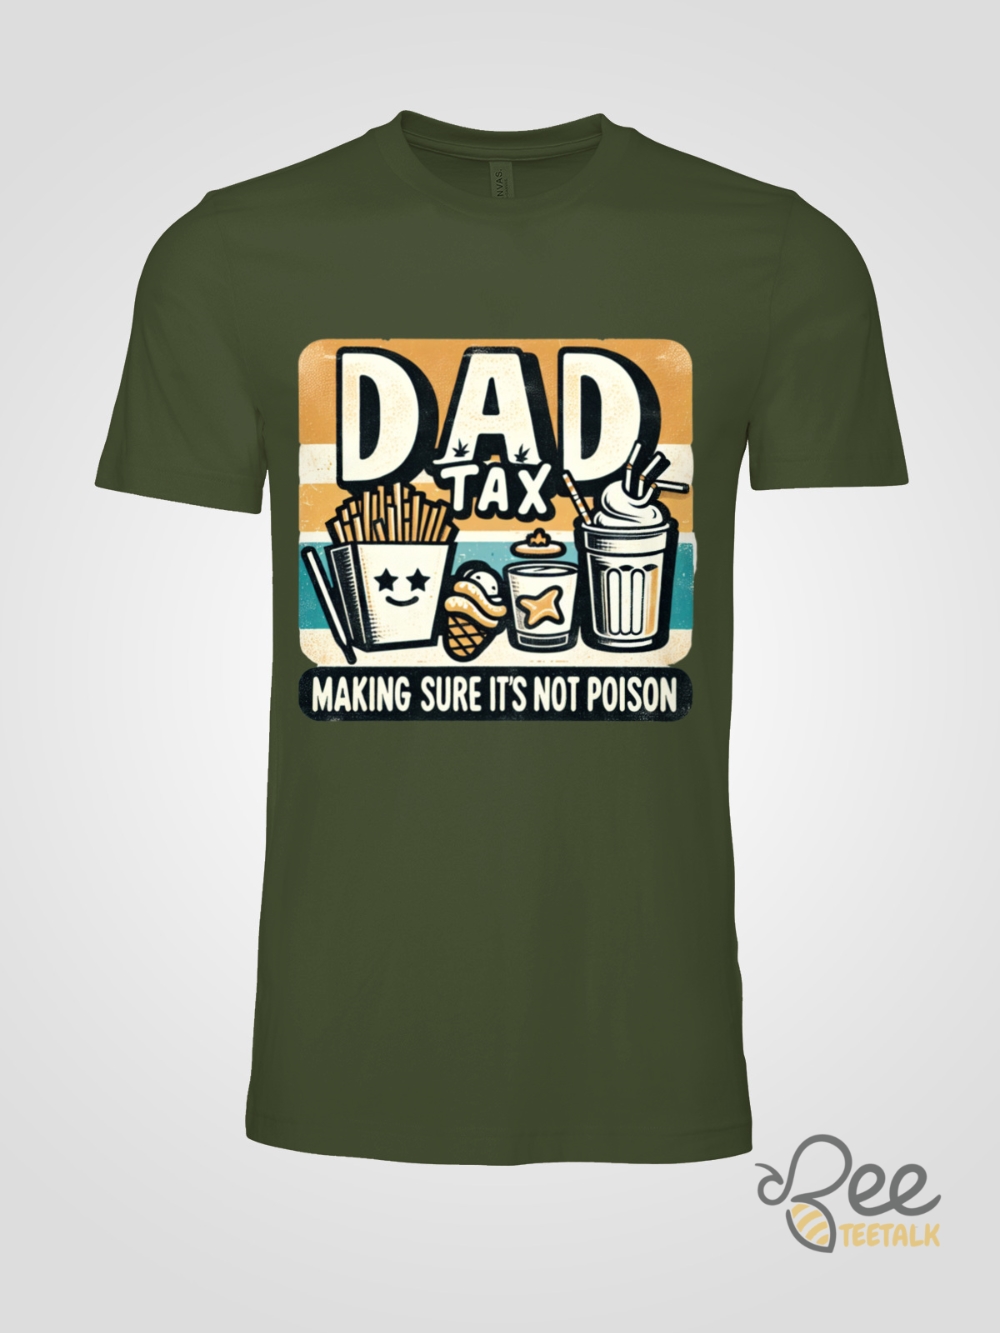 Dad Tax Fathers Day T Shirt Sweatshirt Hoodie Making Sure Its Not Poison Unique And Funny Tee Gift For Dads